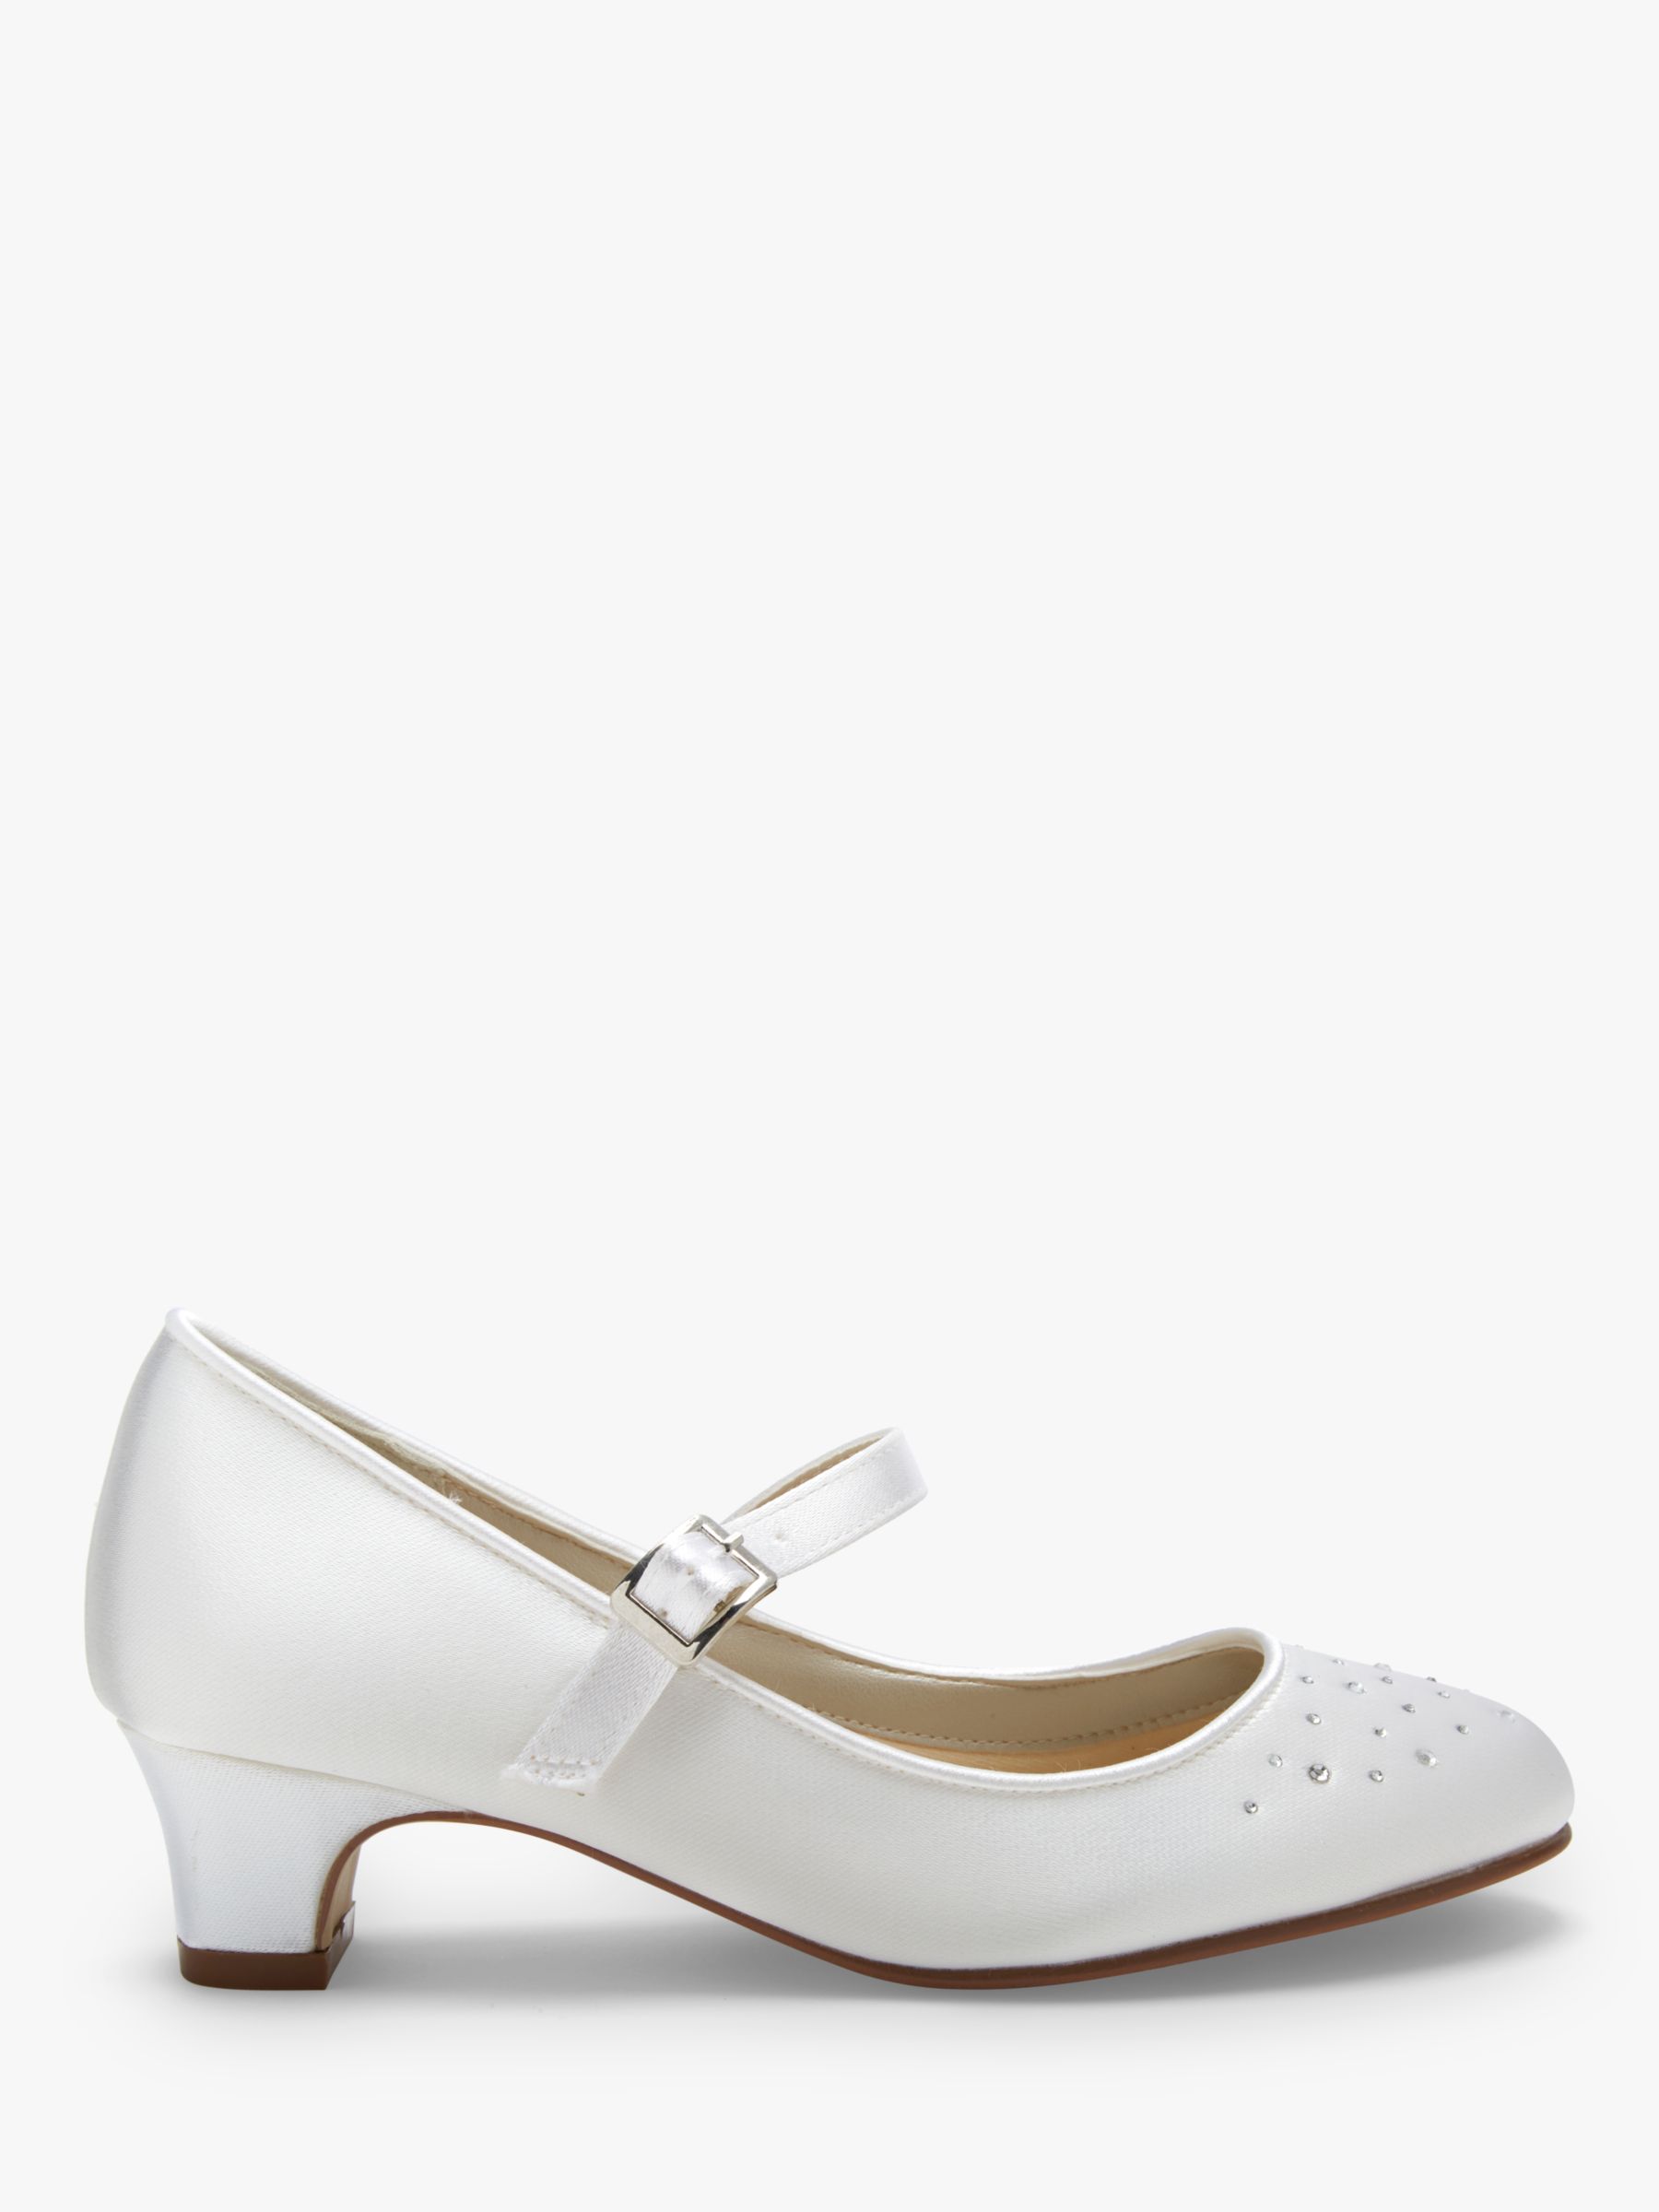 Rainbow Club Verity Bridesmaids' Shoes, White at John Lewis & Partners